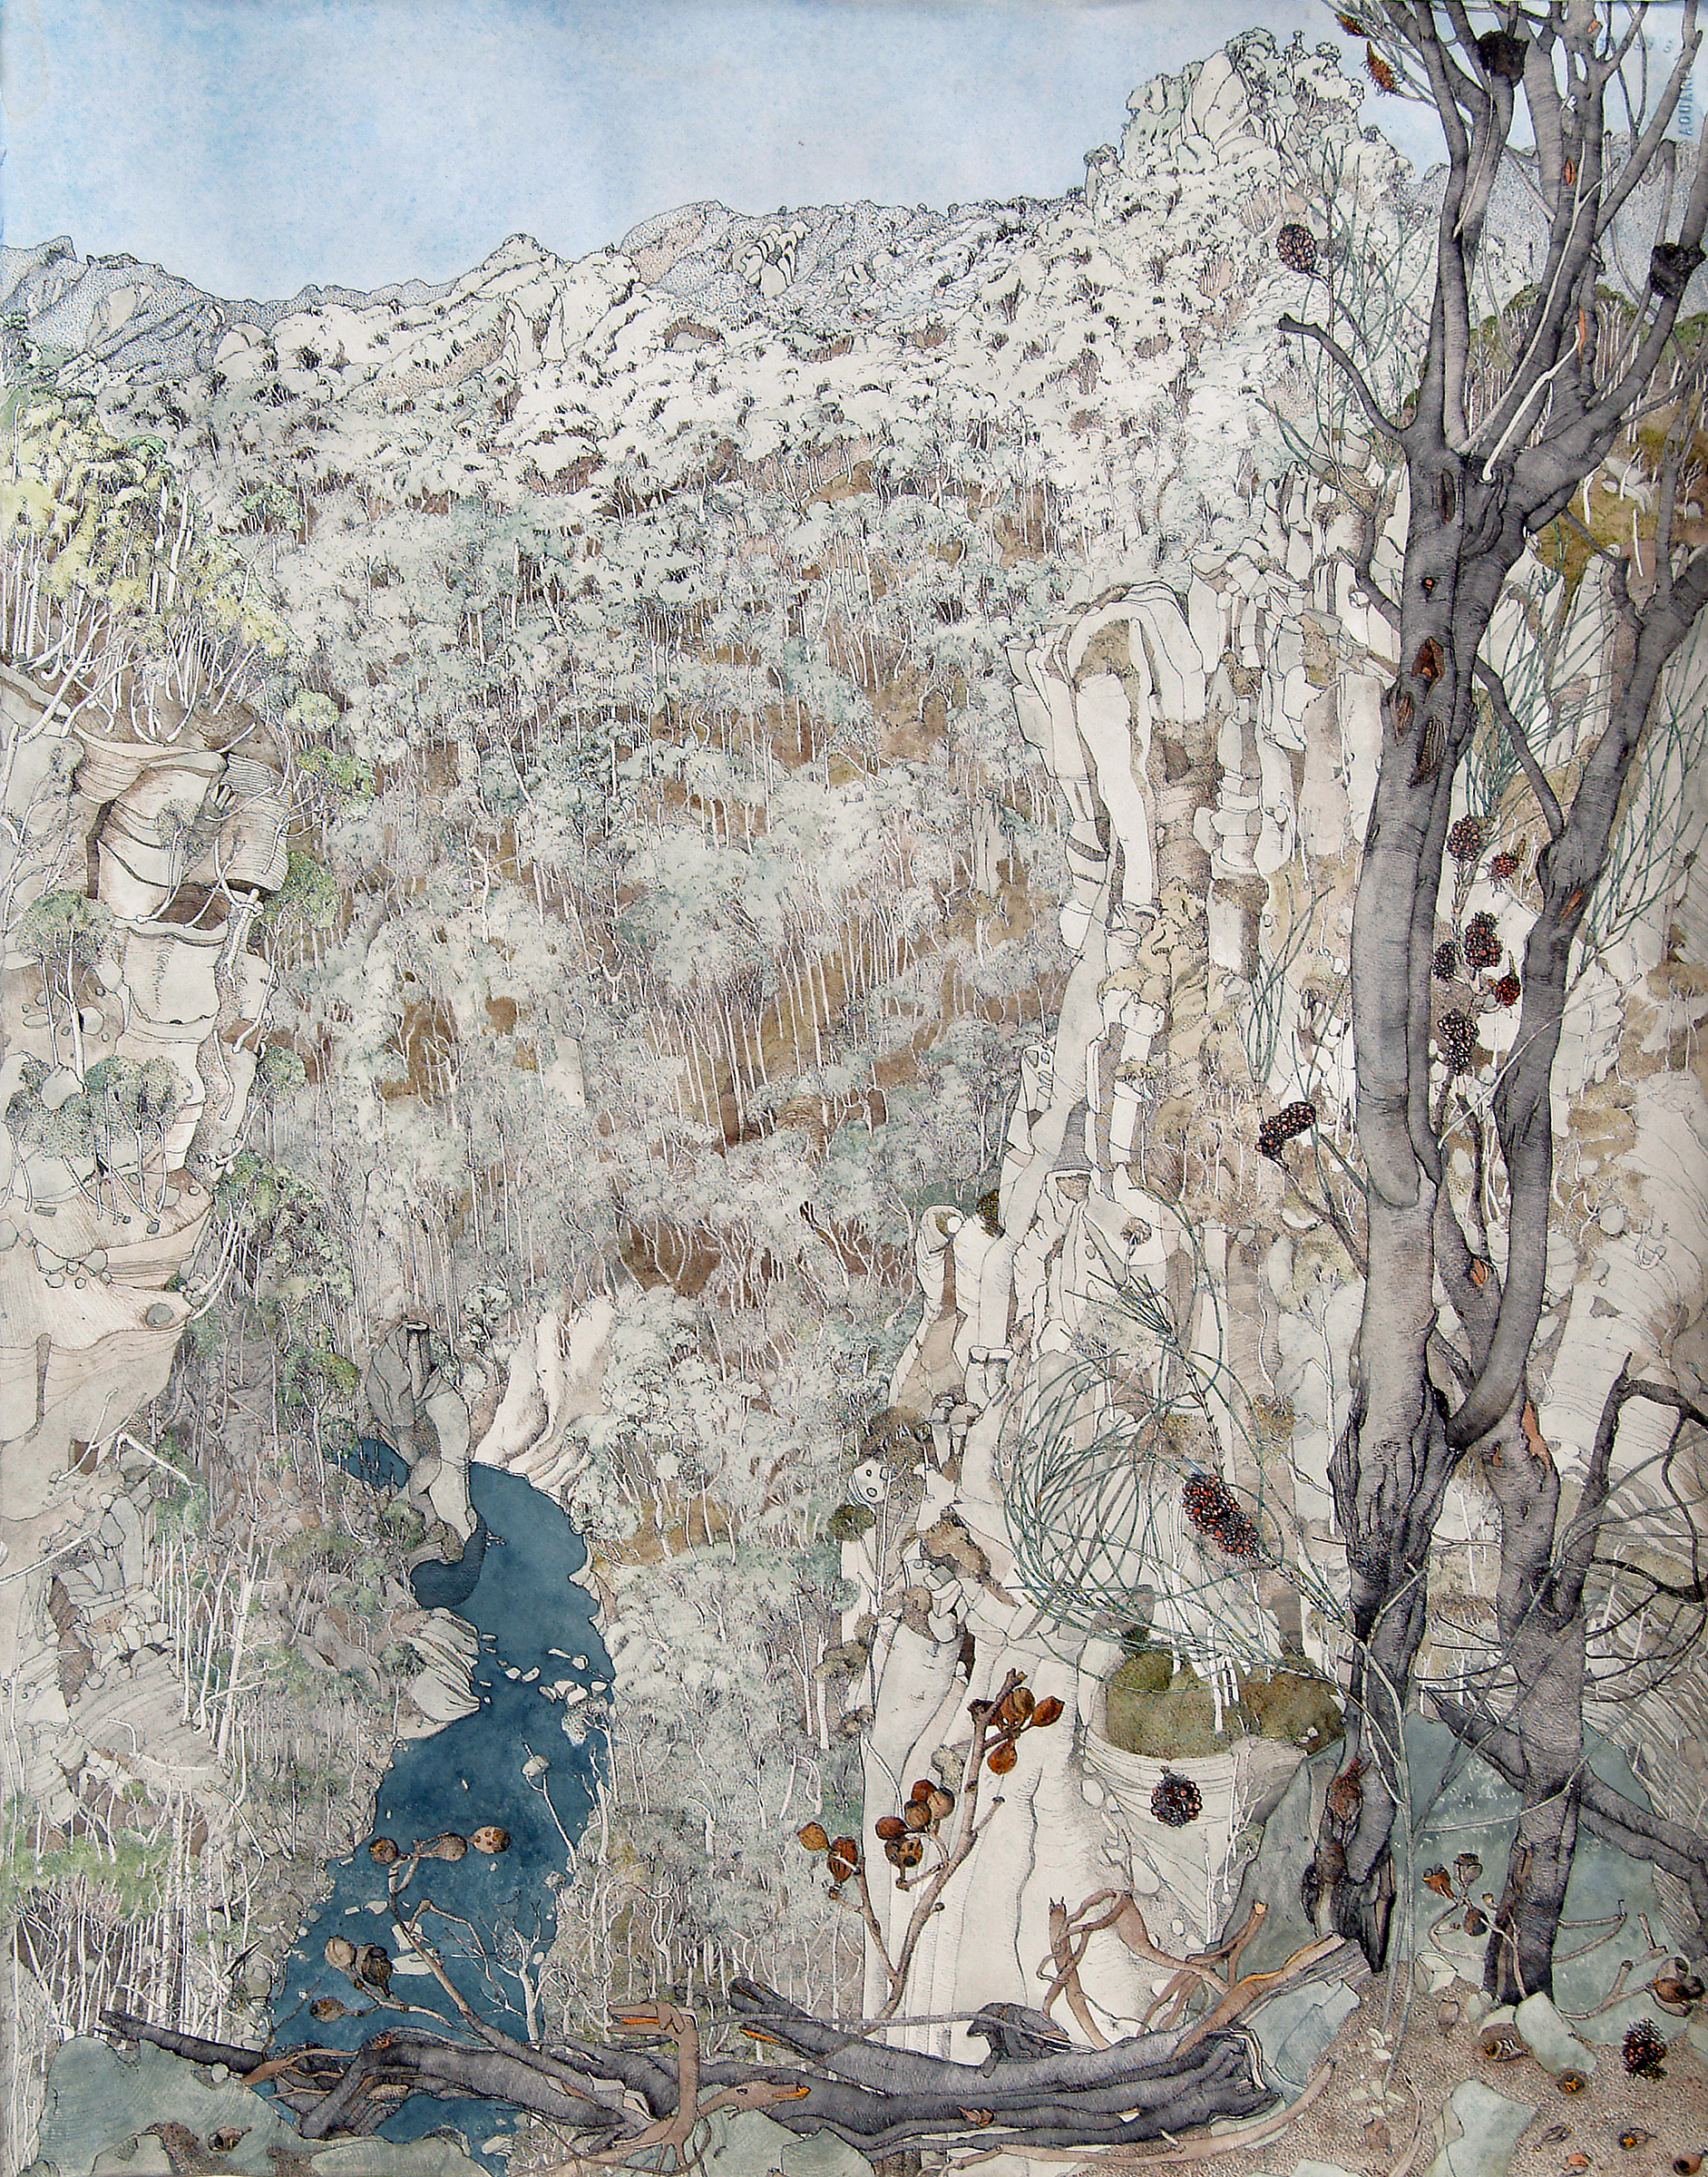 Following the Mersey, Tasmania 2004, Watercolour with ink, Triptych, 60 x 185cm